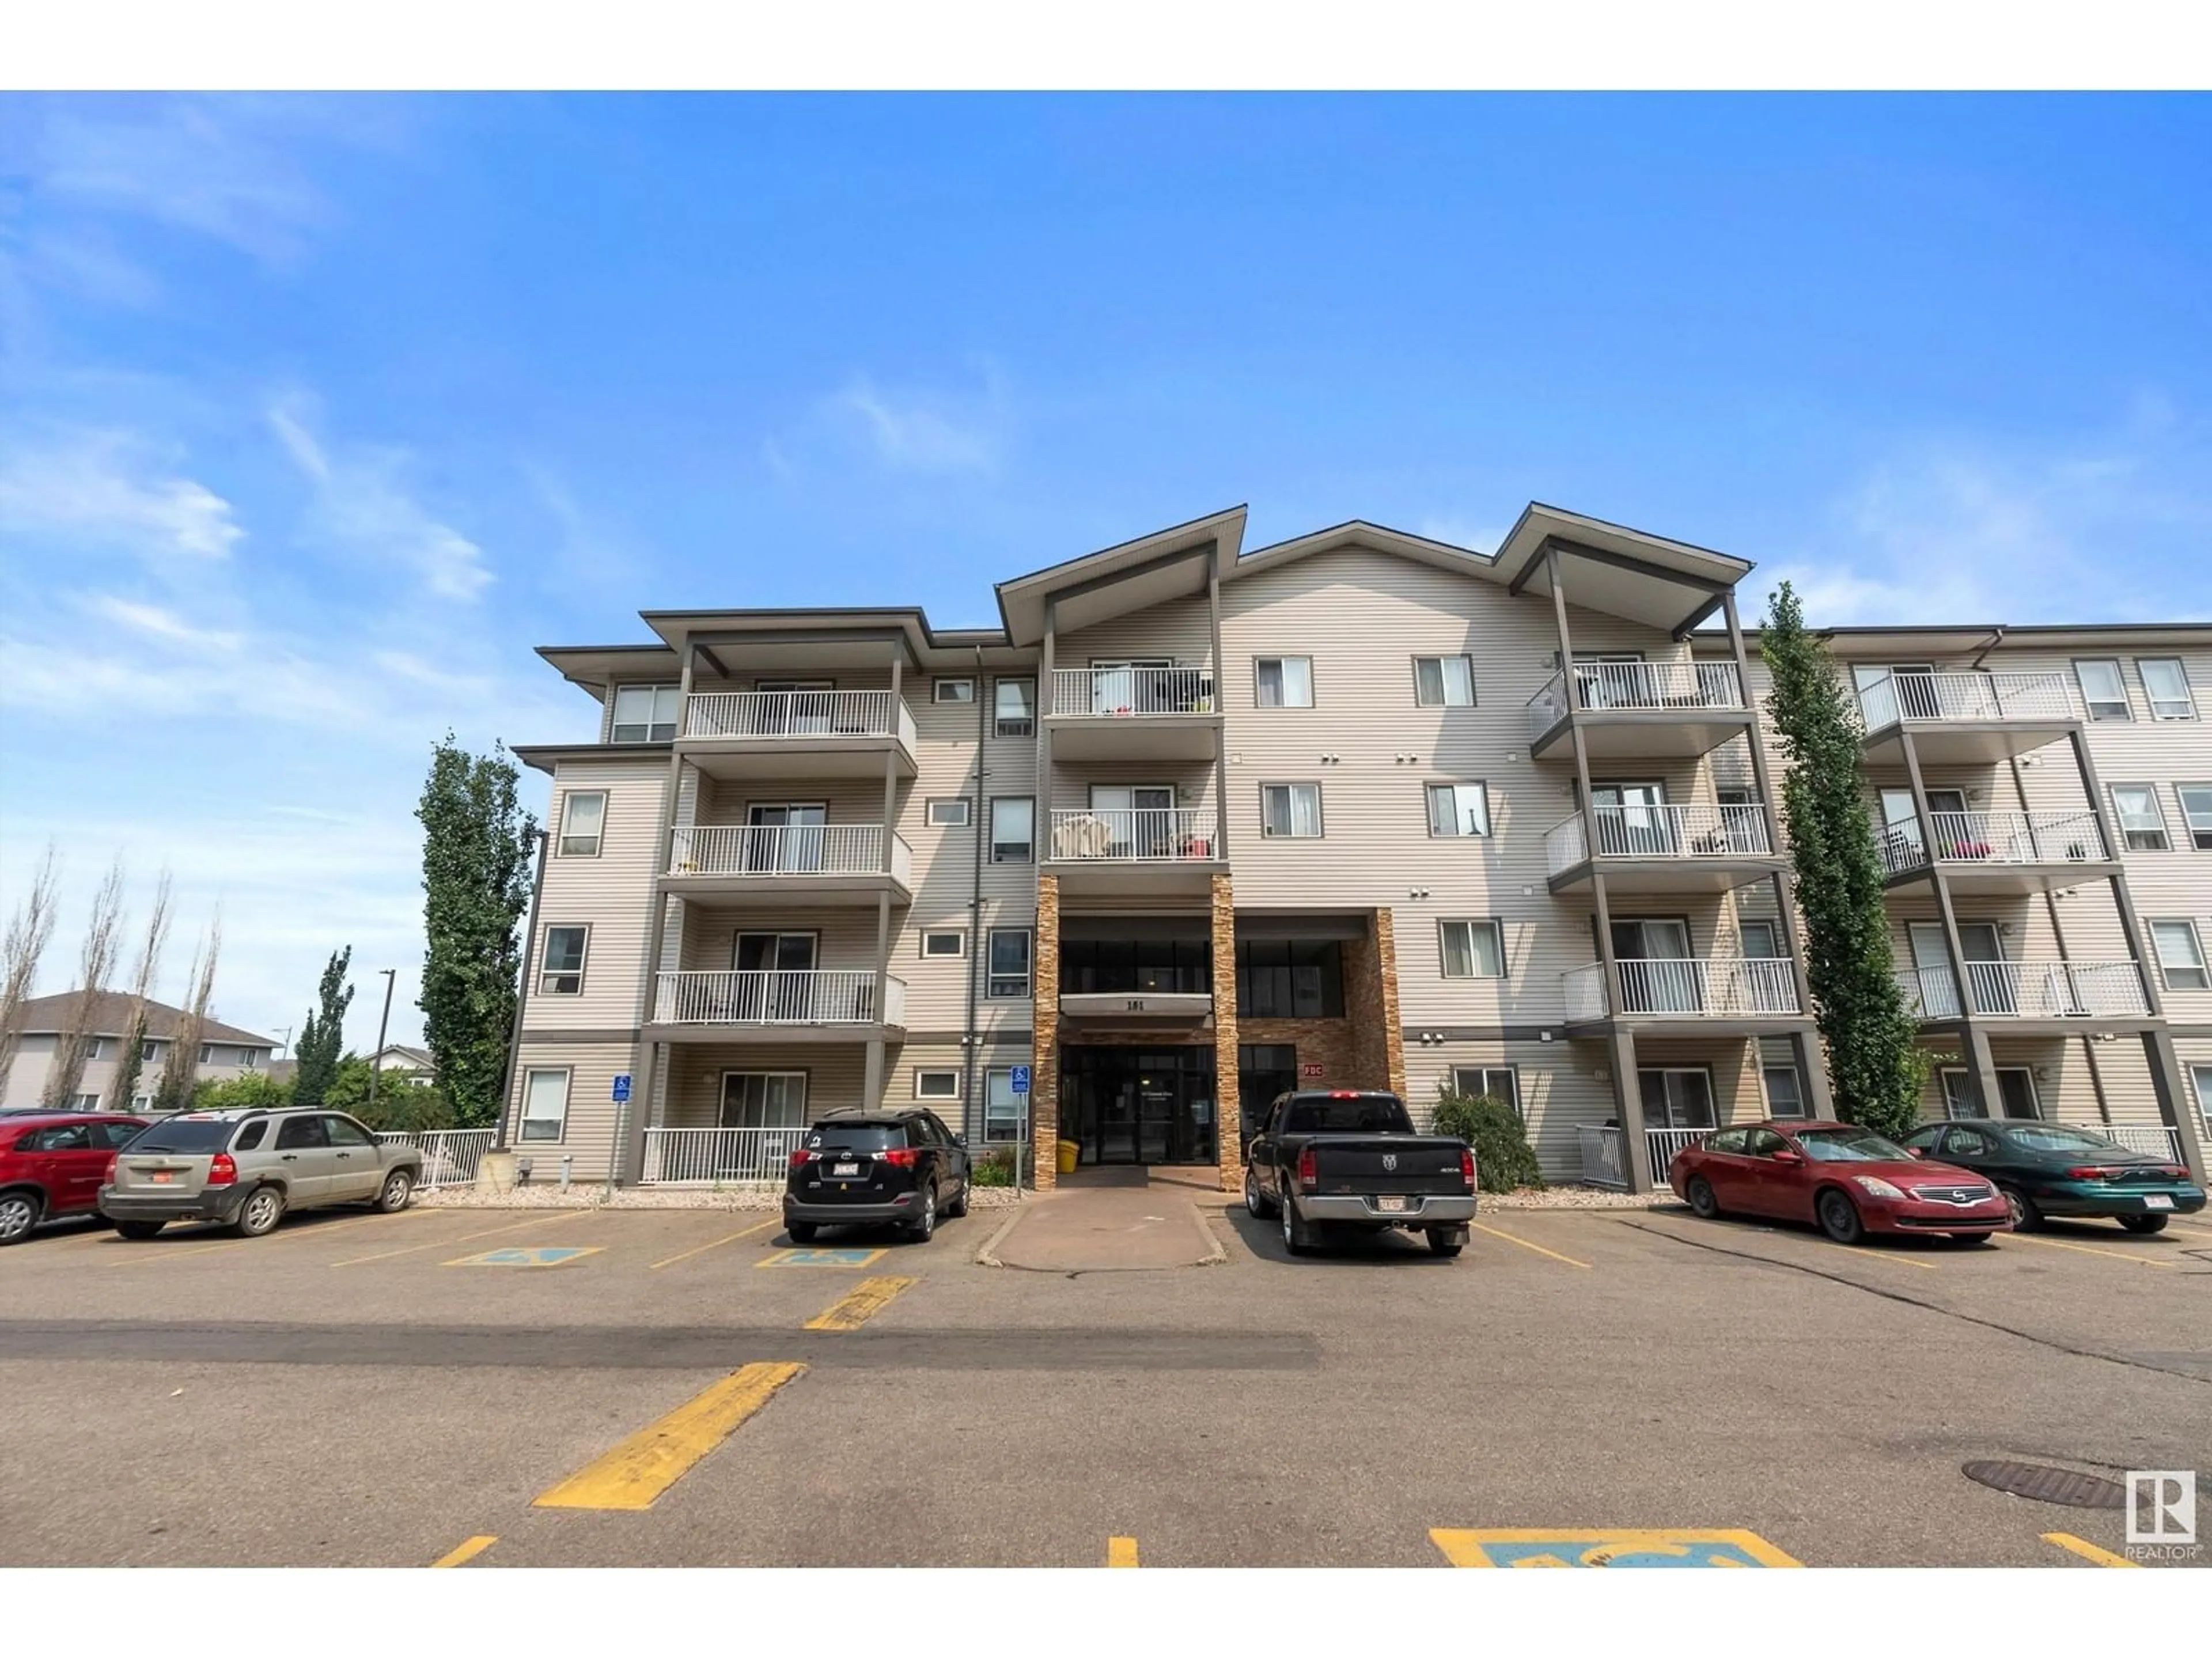 A pic from exterior of the house or condo for #314 151 EDWARDS DR SW, Edmonton Alberta T6X1N5